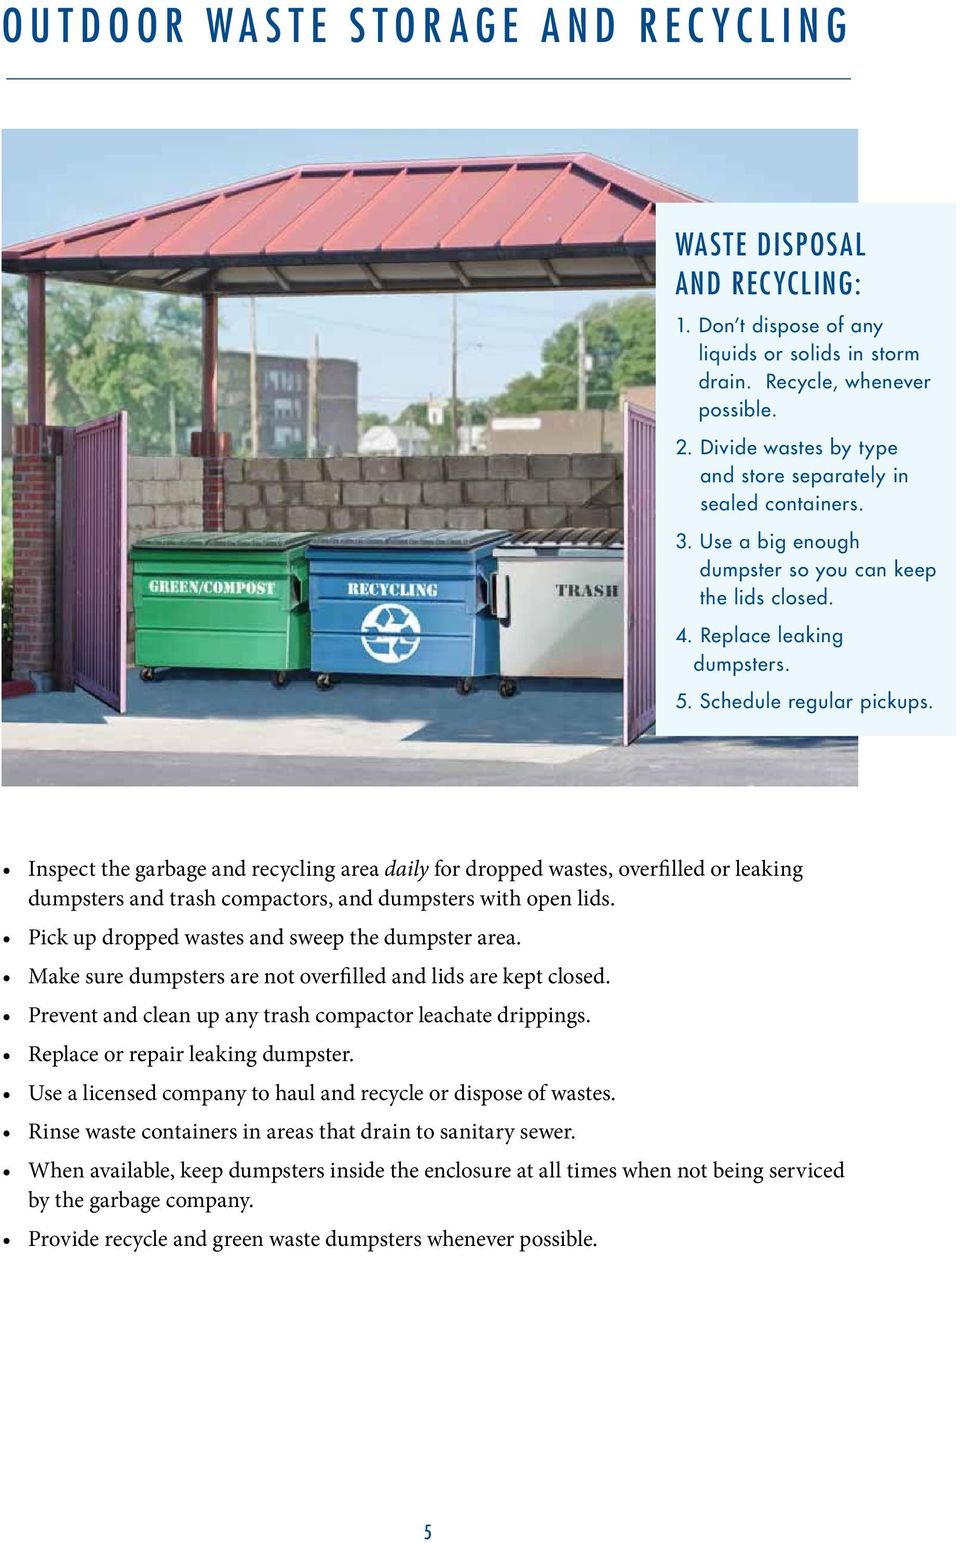 Inspect the garbage and recycling area daily for dropped wastes, overfilled or leaking dumpsters and trash compactors, and dumpsters with open lids. Pick up dropped wastes and sweep the dumpster area.